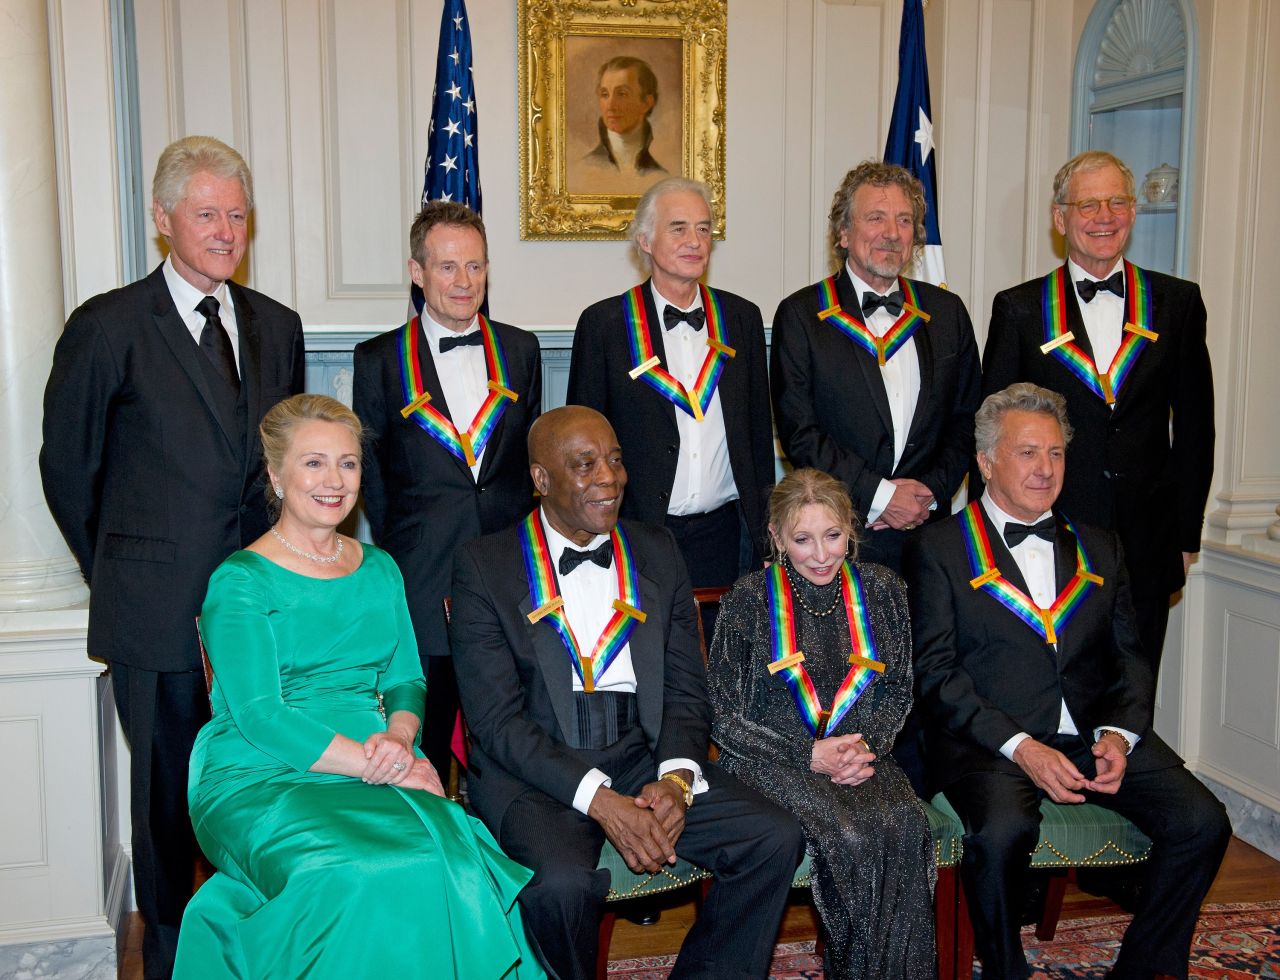 The Clintons honor the recipients at a State Department dinner Saturday. Back row, from left, former U.S. President Bill Clinton, Led Zeppelin's John Paul Jones, Jimmy Page and Robert Plant, and David Letterman. Front row, Hillary Clinton, Buddy Guy, Natalia Makarova and Dustin Hoffman.